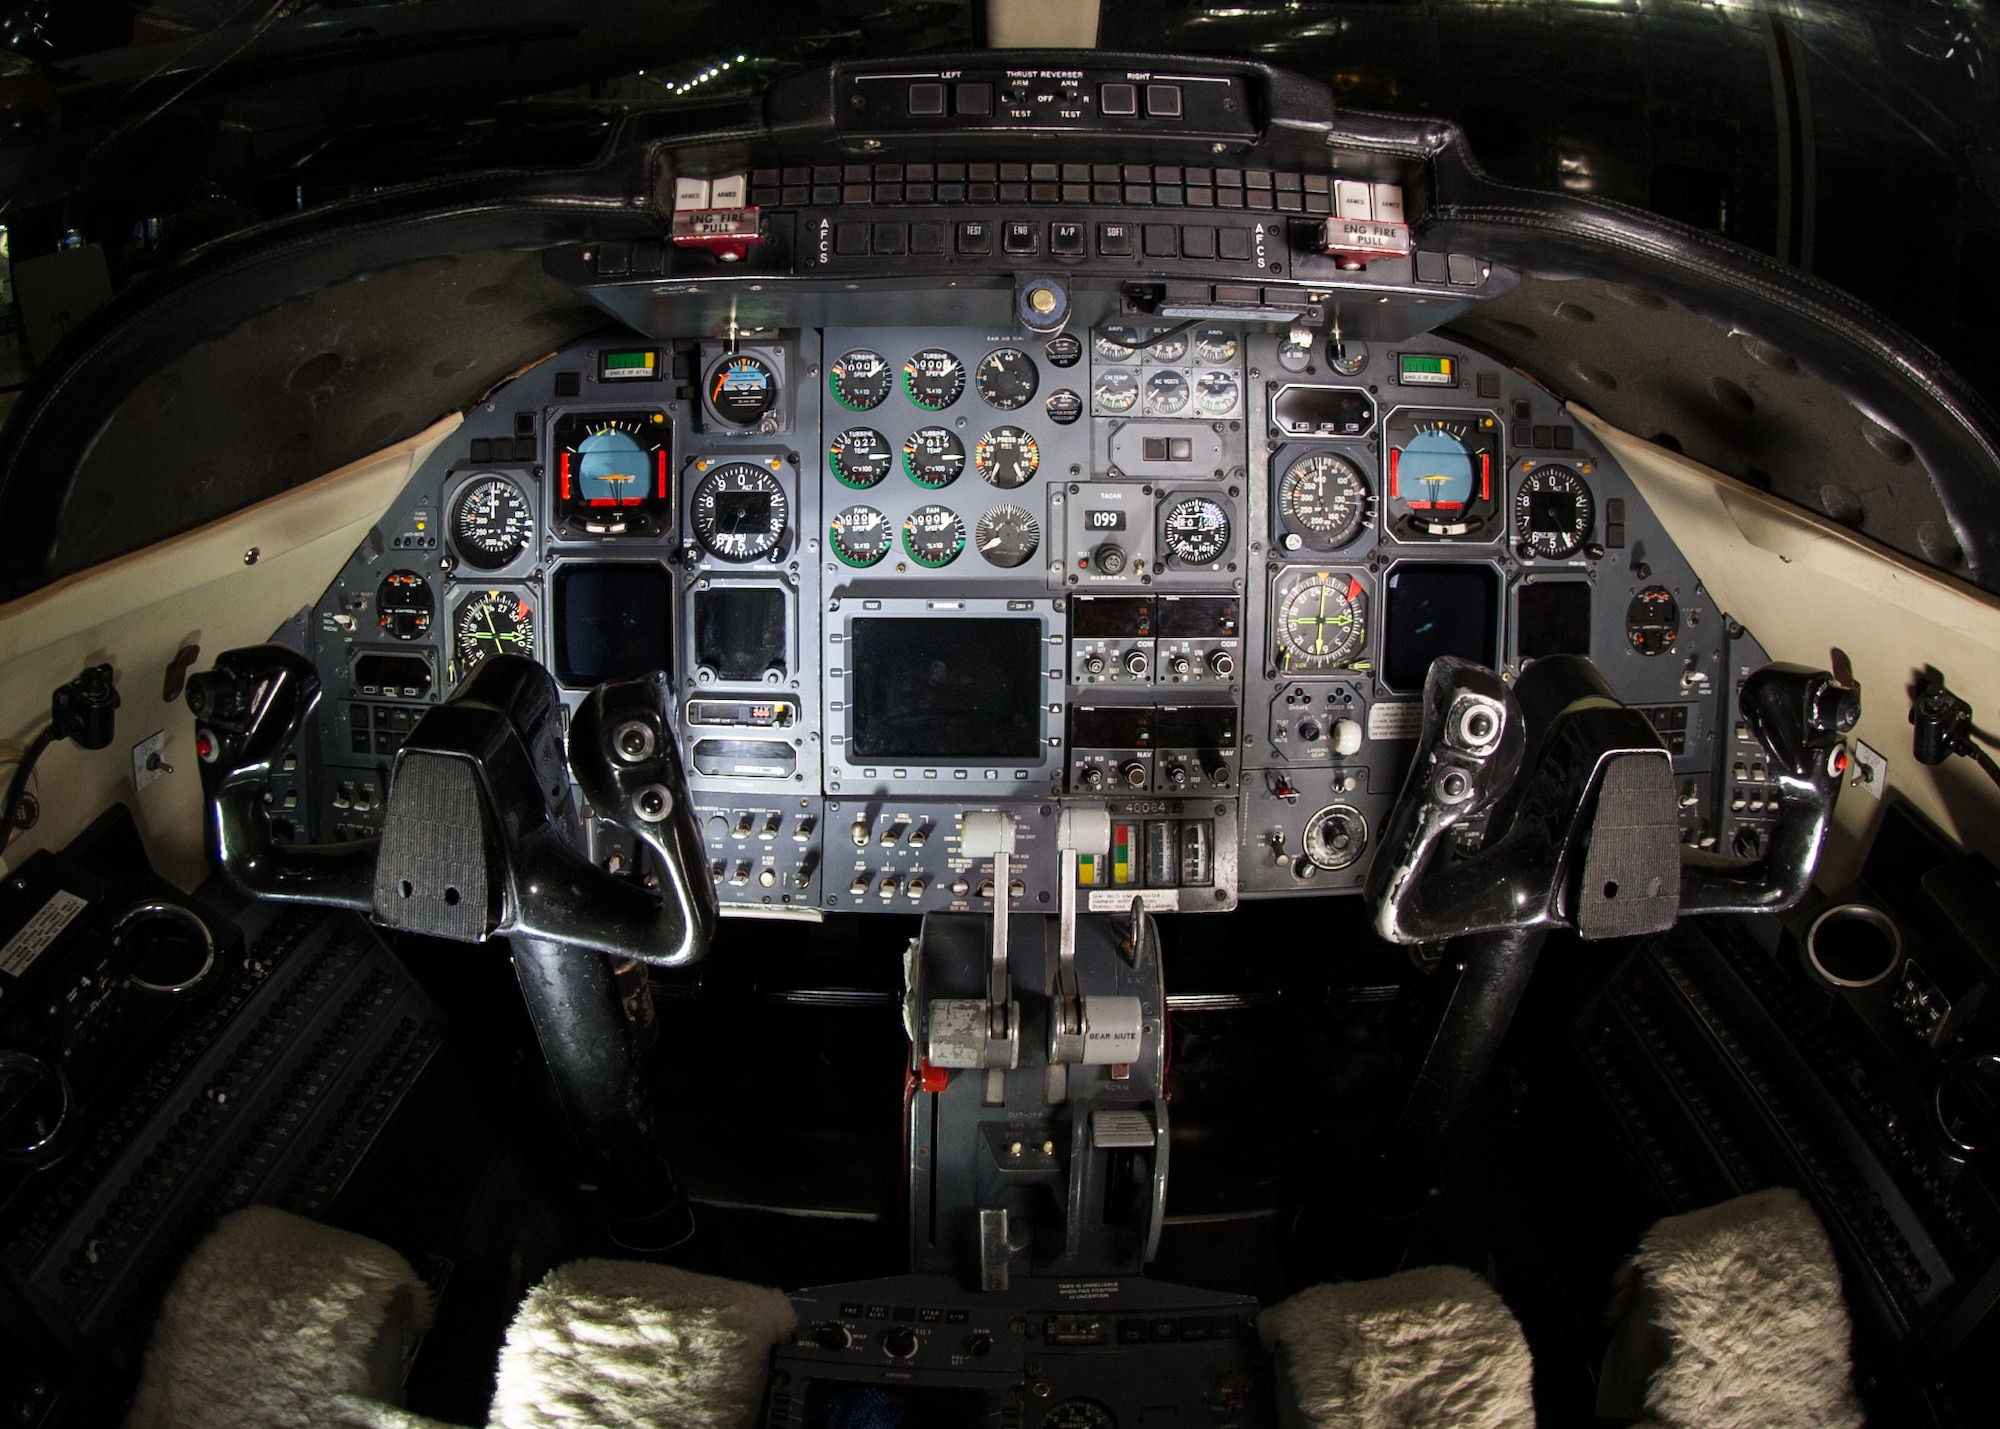 DAYTON, Ohio -- Learjet C-21A cockpit at the National Museum of the U.S. Air Force. (U.S. Air Force photo by Ken LaRock)